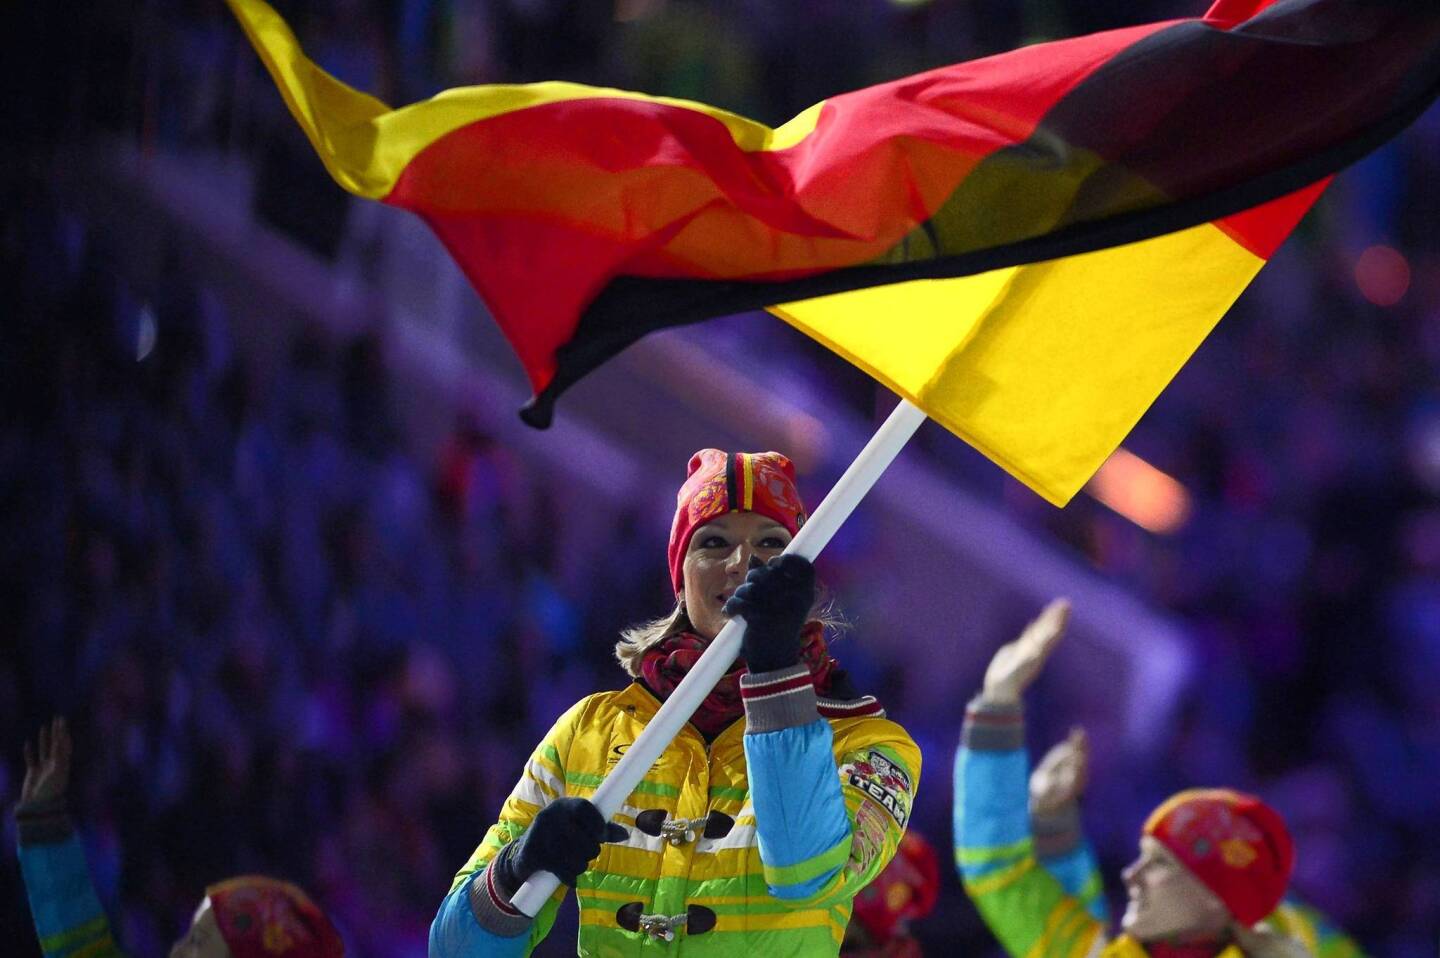 Germany's flag bearer, alpine skier Maria Hoefl-Riesch, leads her national delegation during the opening ceremony.